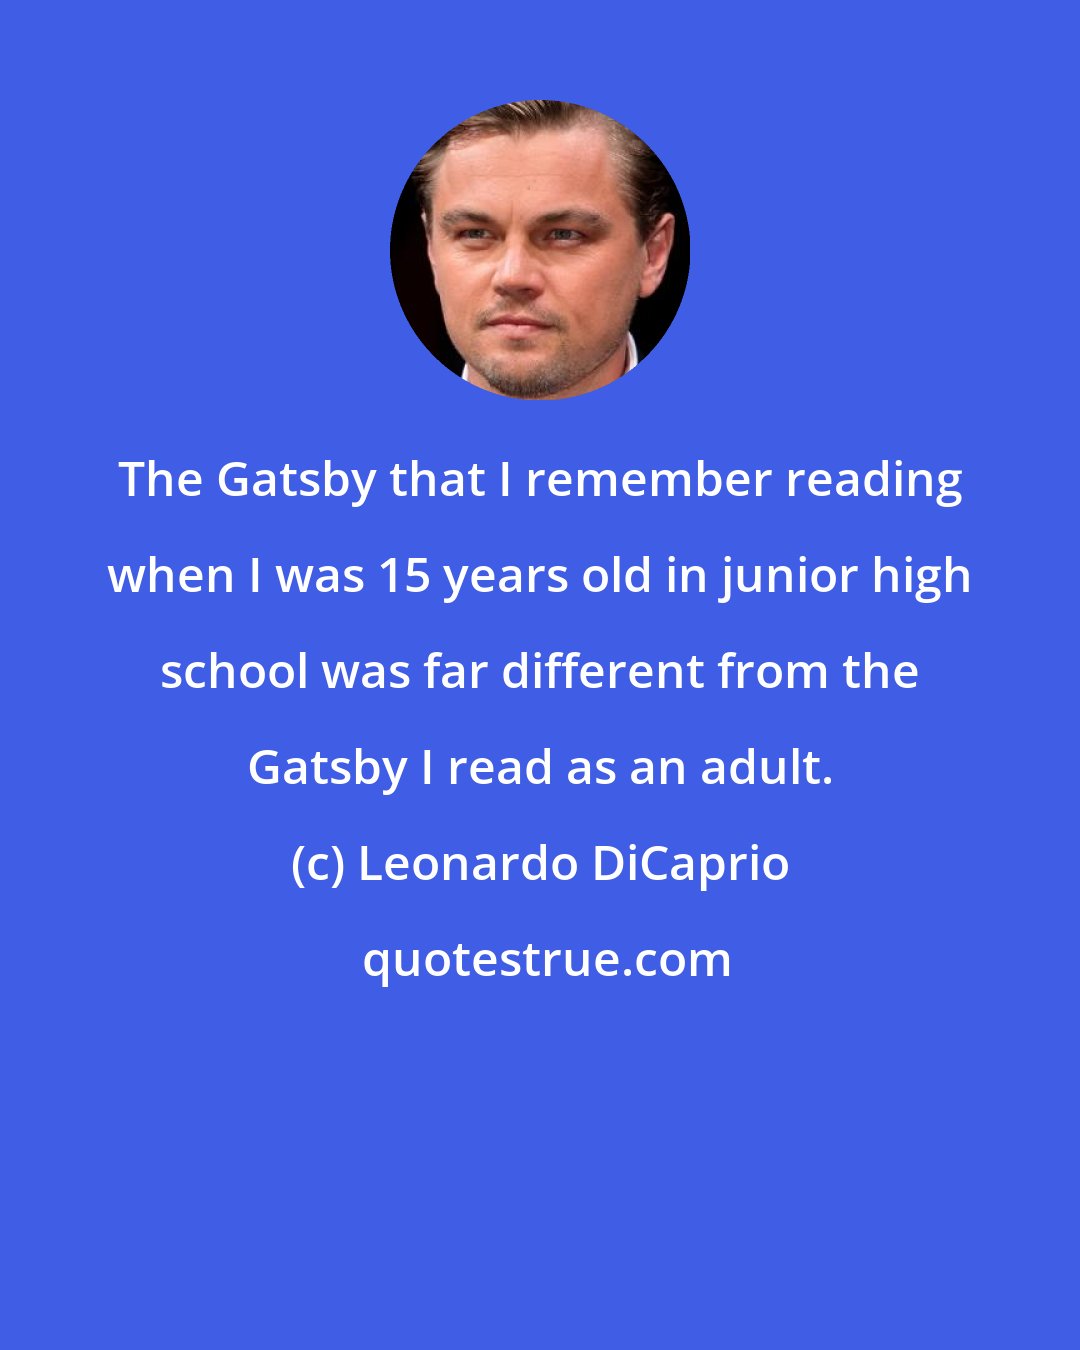 Leonardo DiCaprio: The Gatsby that I remember reading when I was 15 years old in junior high school was far different from the Gatsby I read as an adult.